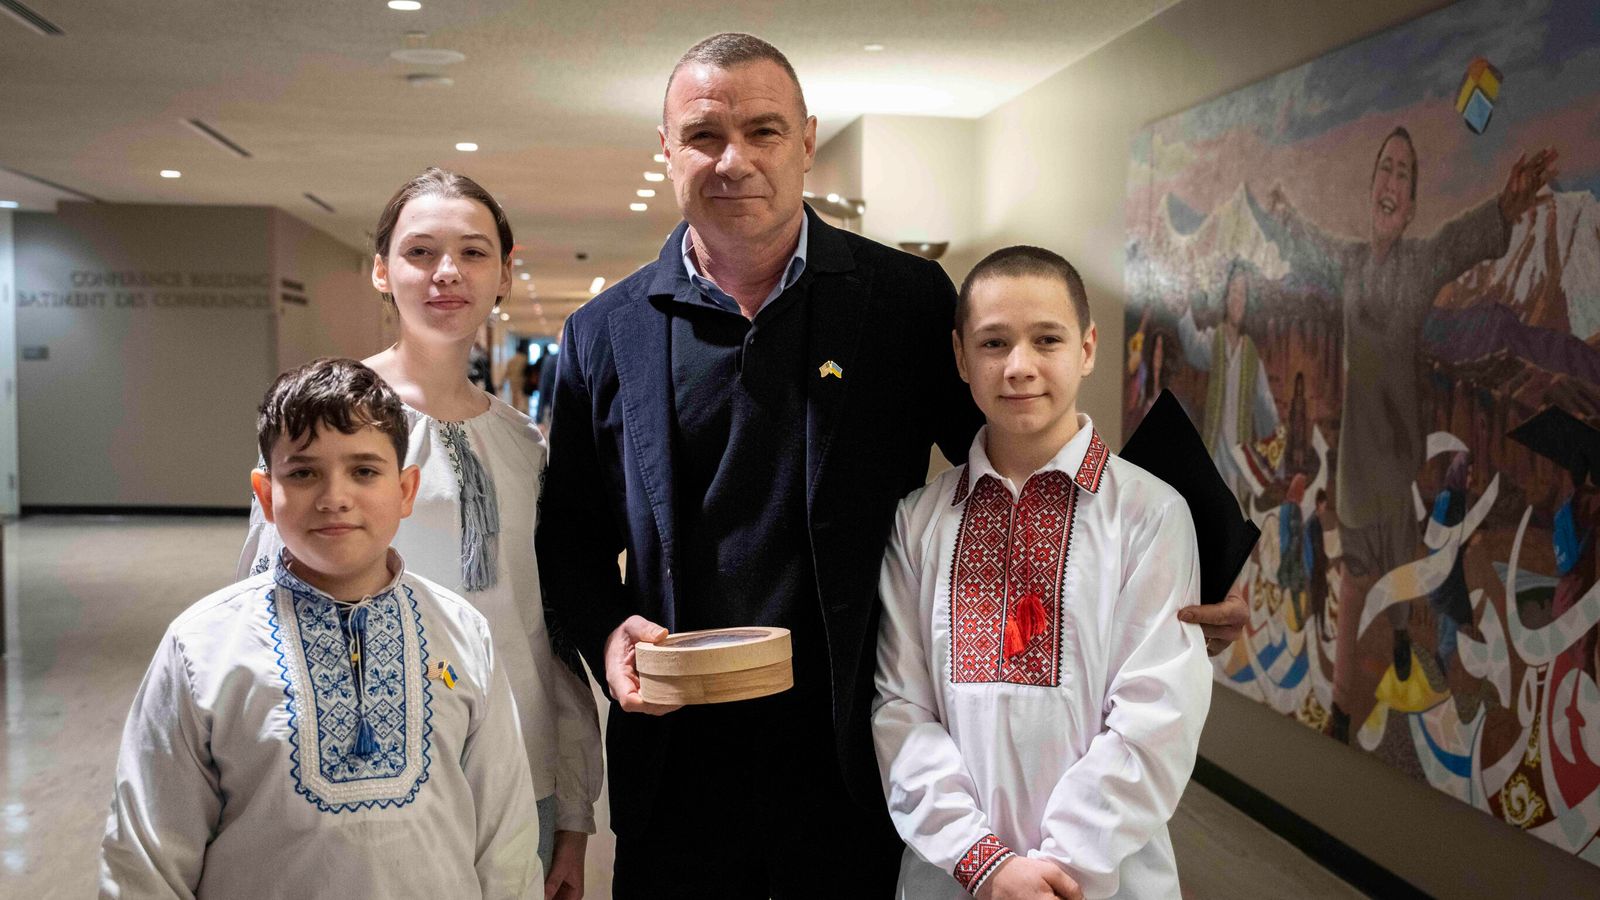 You are currently viewing Liev Schreiber Champions Cause of Ukraine’s Missing Children at UN Meeting